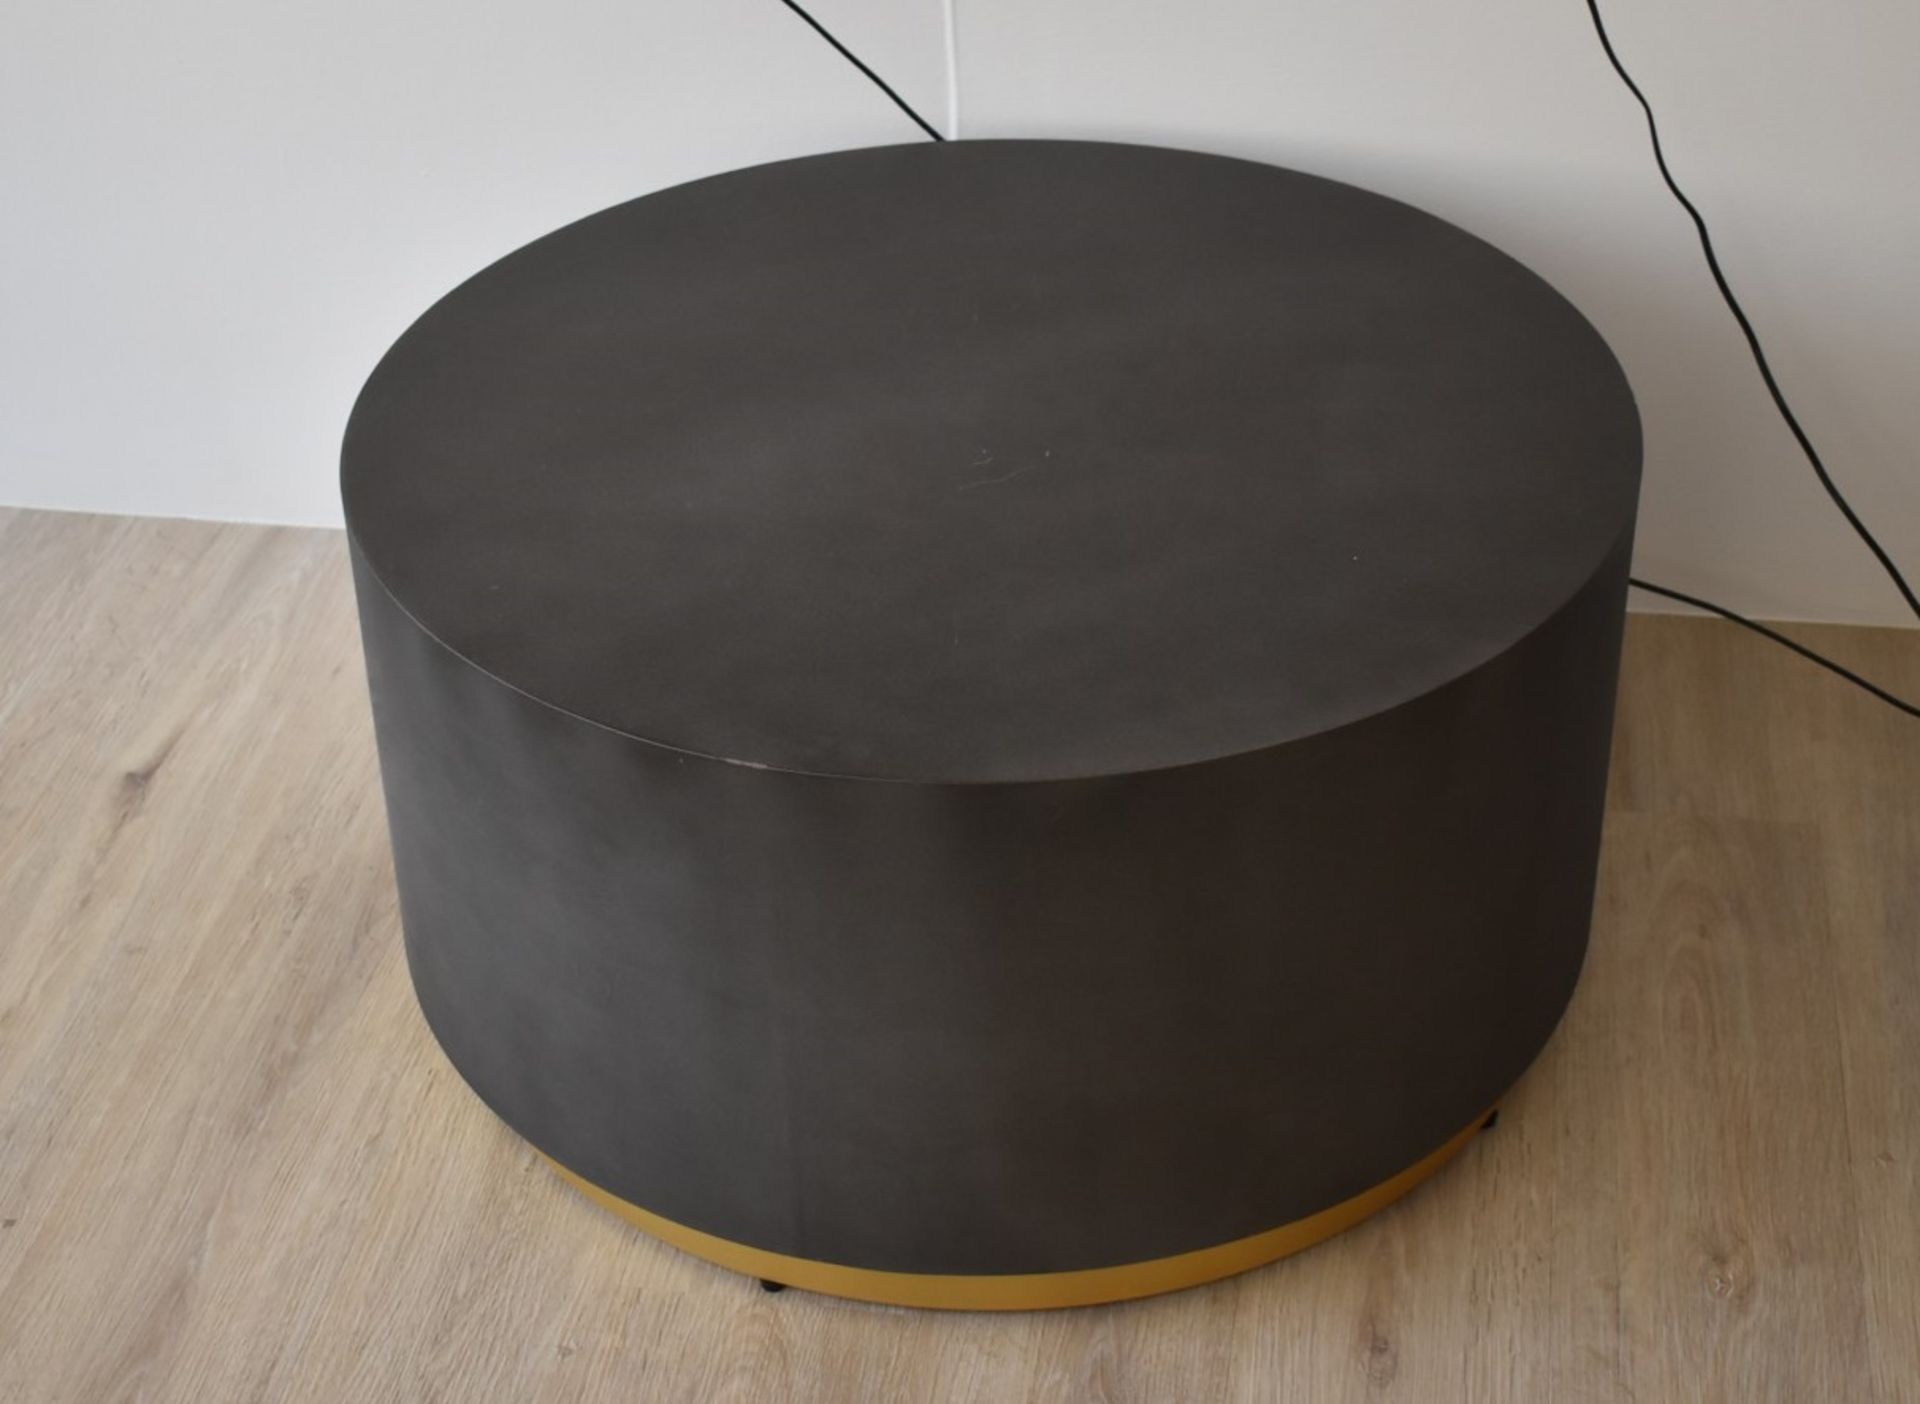 1 x Round Coffee Table With Concrete Effect Finish and Gold Base - RRP £455 - NO VAT ON THE HAMMER! - Image 6 of 7